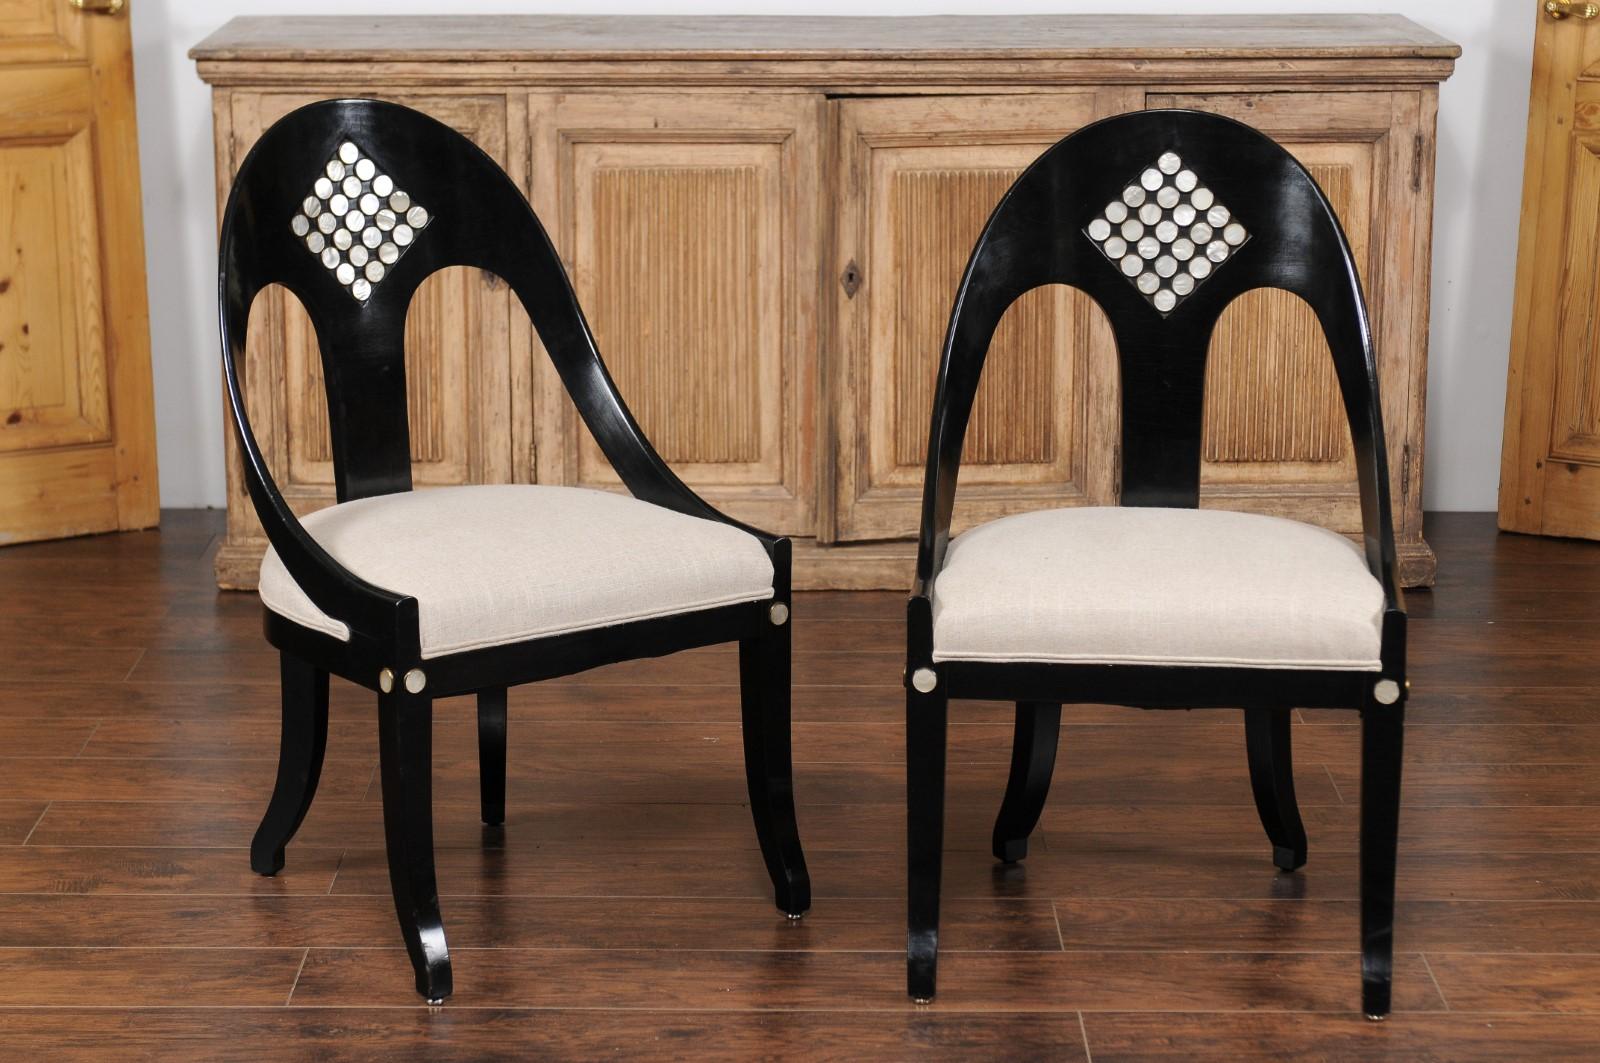 A pair of vintage American ebonized wood spoon back chairs from the mid 20th century, with mother of pearl inlay and newly upholstered seats. Born during the midcentury period, each of this pair of ebonized chairs features a pierced spoon back,